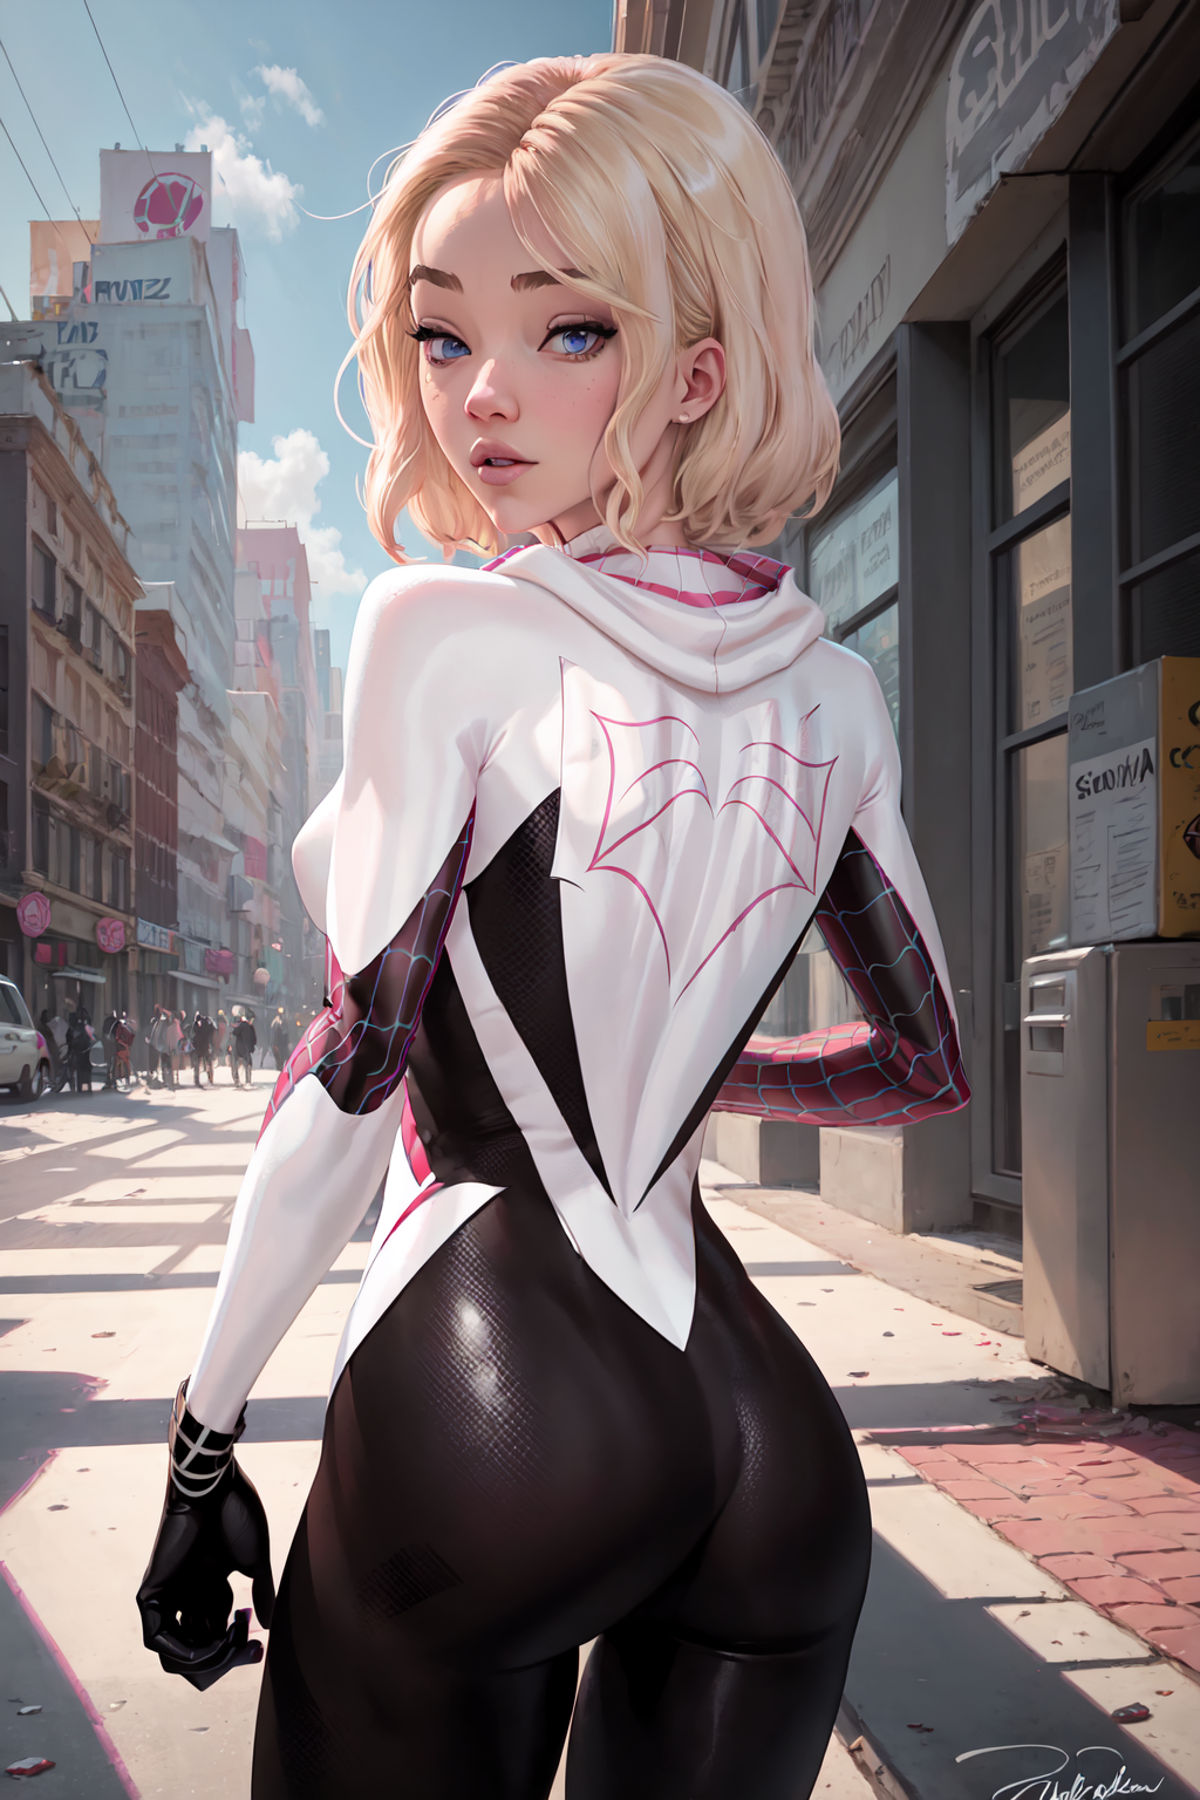 Spider Gwen (commission) | Goofy Ai image by Goofy_Ai